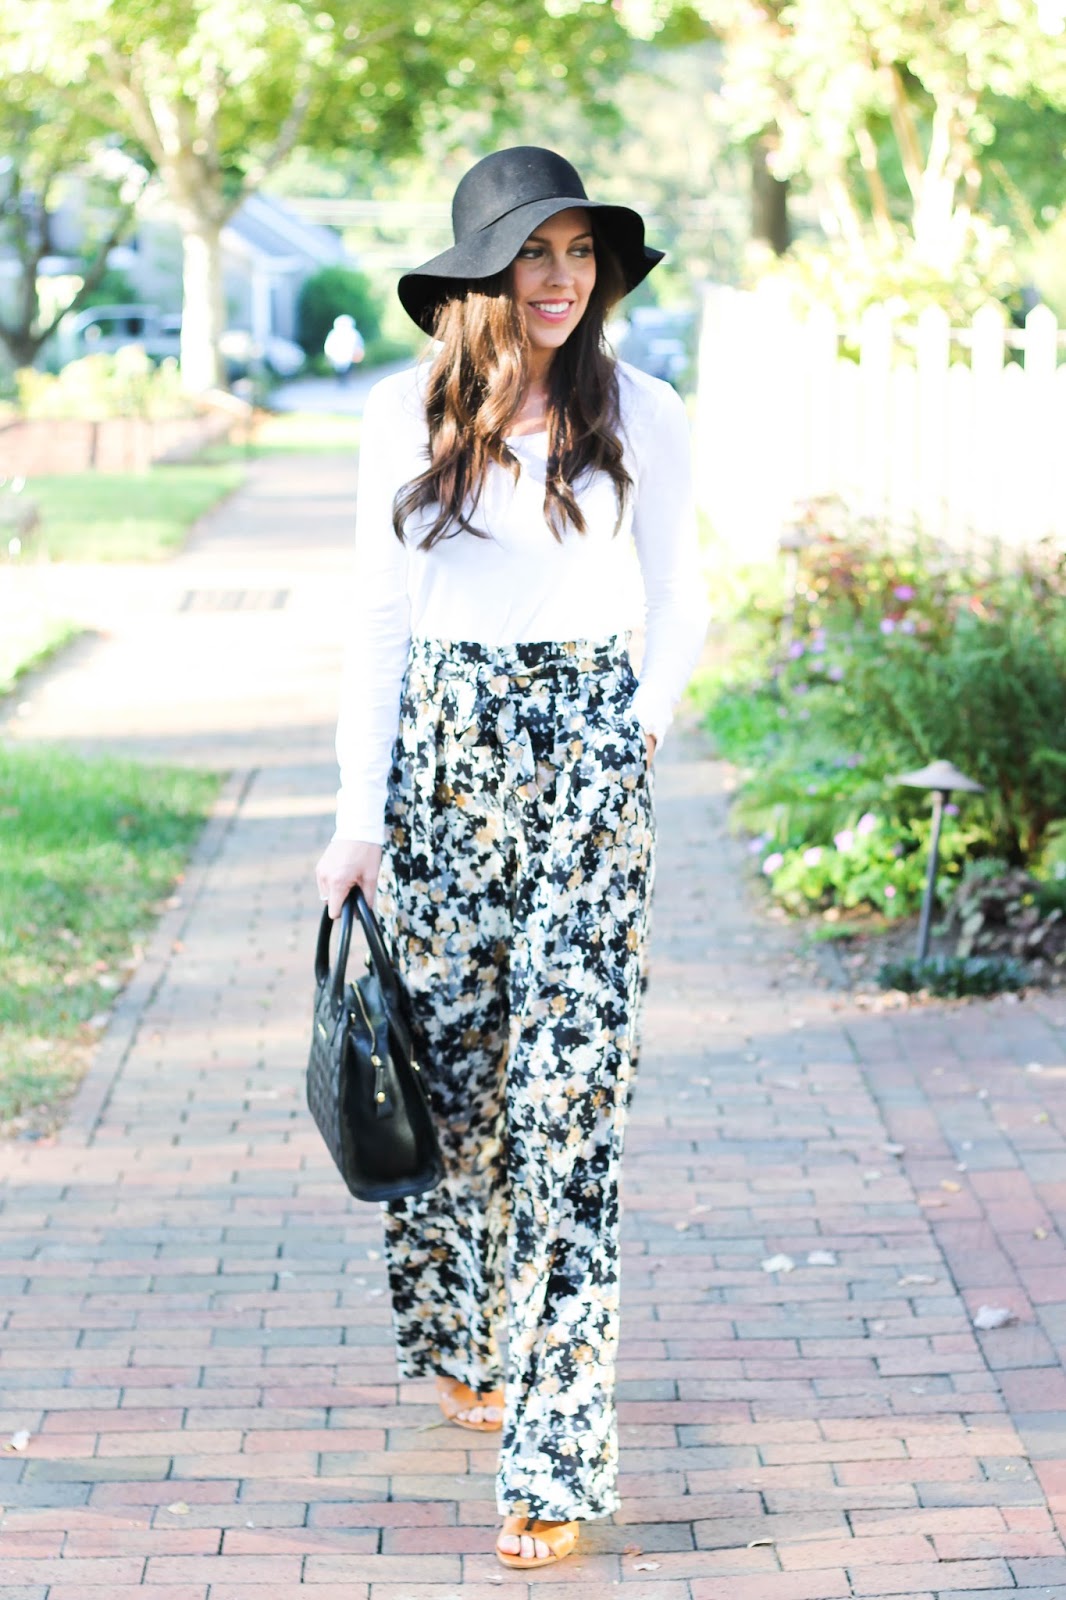 Nordstrom Leith Pleated Highwaisted Print Flare Pants, LOFT white long sleeve tee, black felt floppy hat,  quilted Vera Bradley satchel, fall outfit, cute fall look, ways to simplify your life, printed pants, Fearrington Village